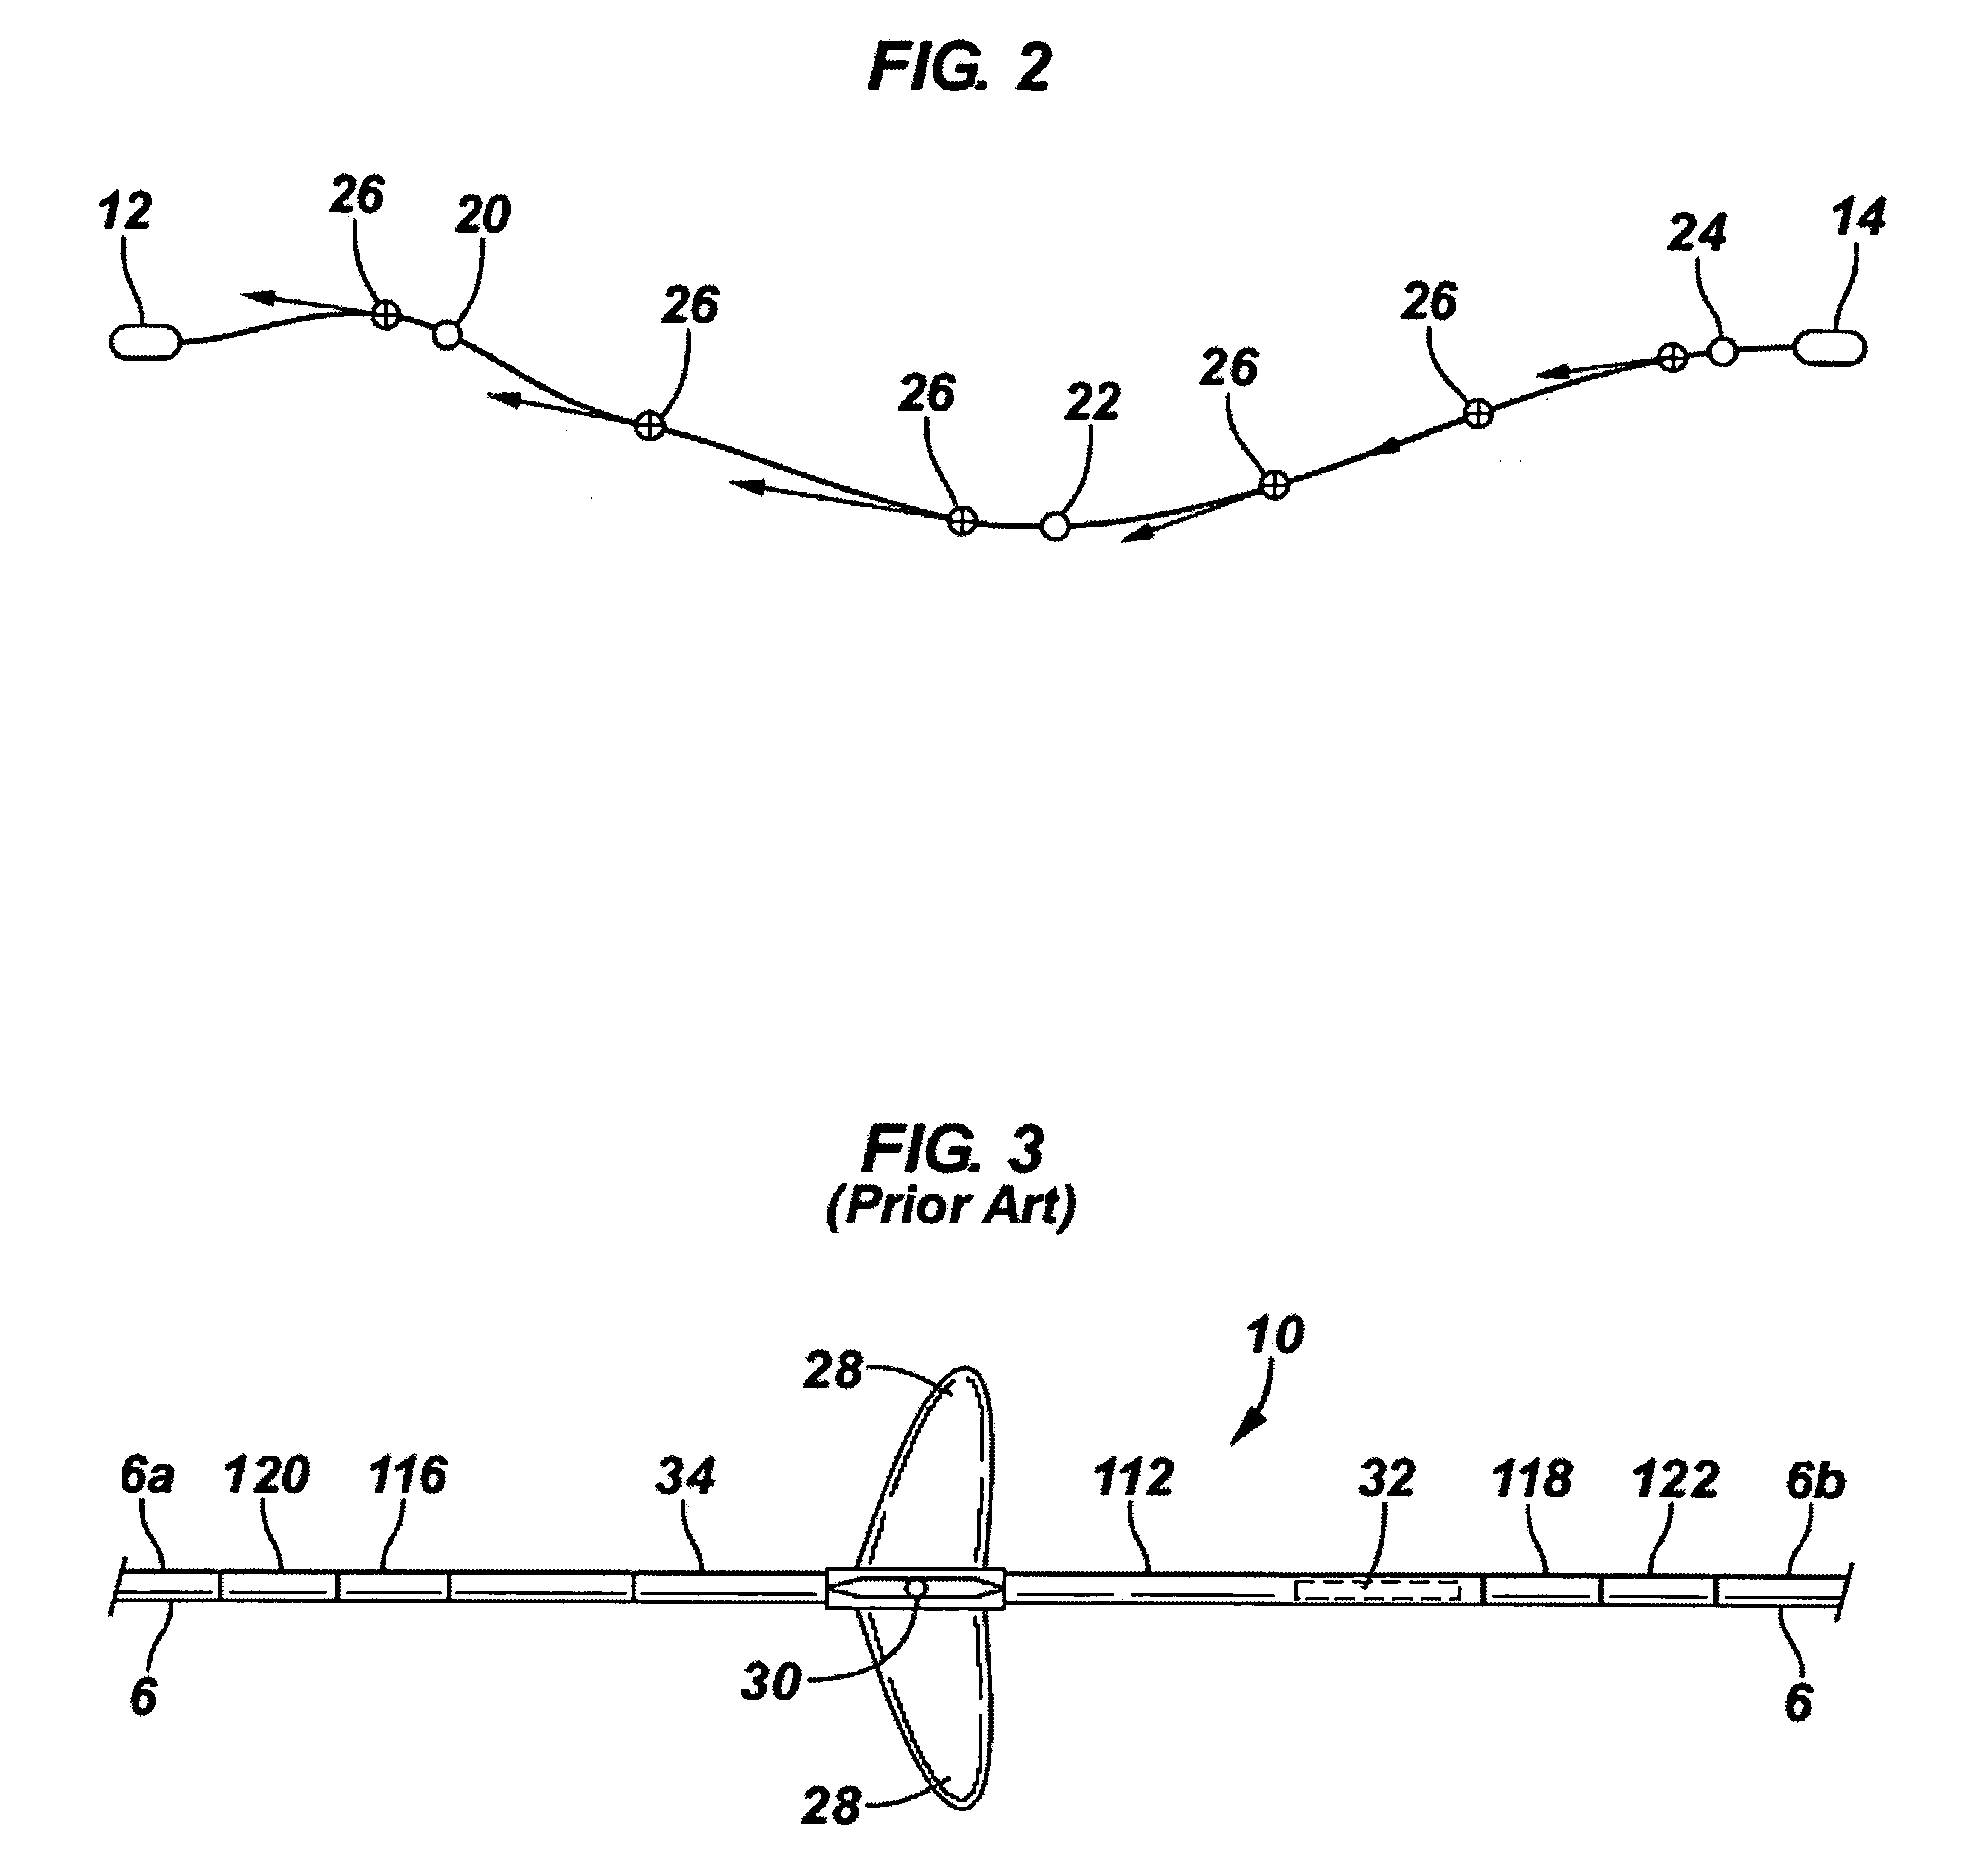 Methods for deriving shape of seismic data acquisition cables and streamers employing a force model